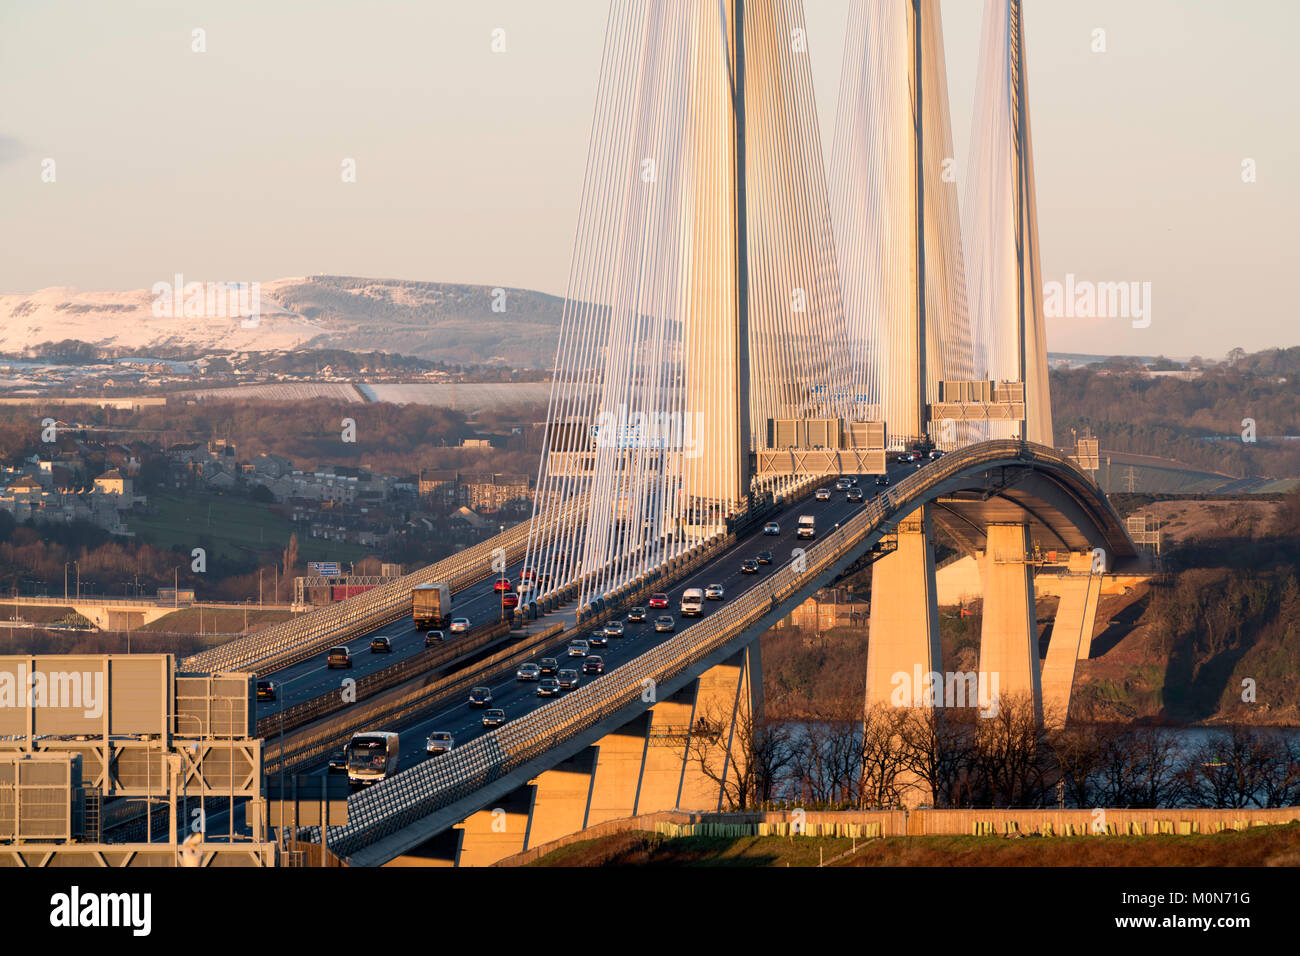 View of new Queensferry Crossing bridge spanning the River Forth at South Queensferry, Scotland, United Kingdom. Stock Photo